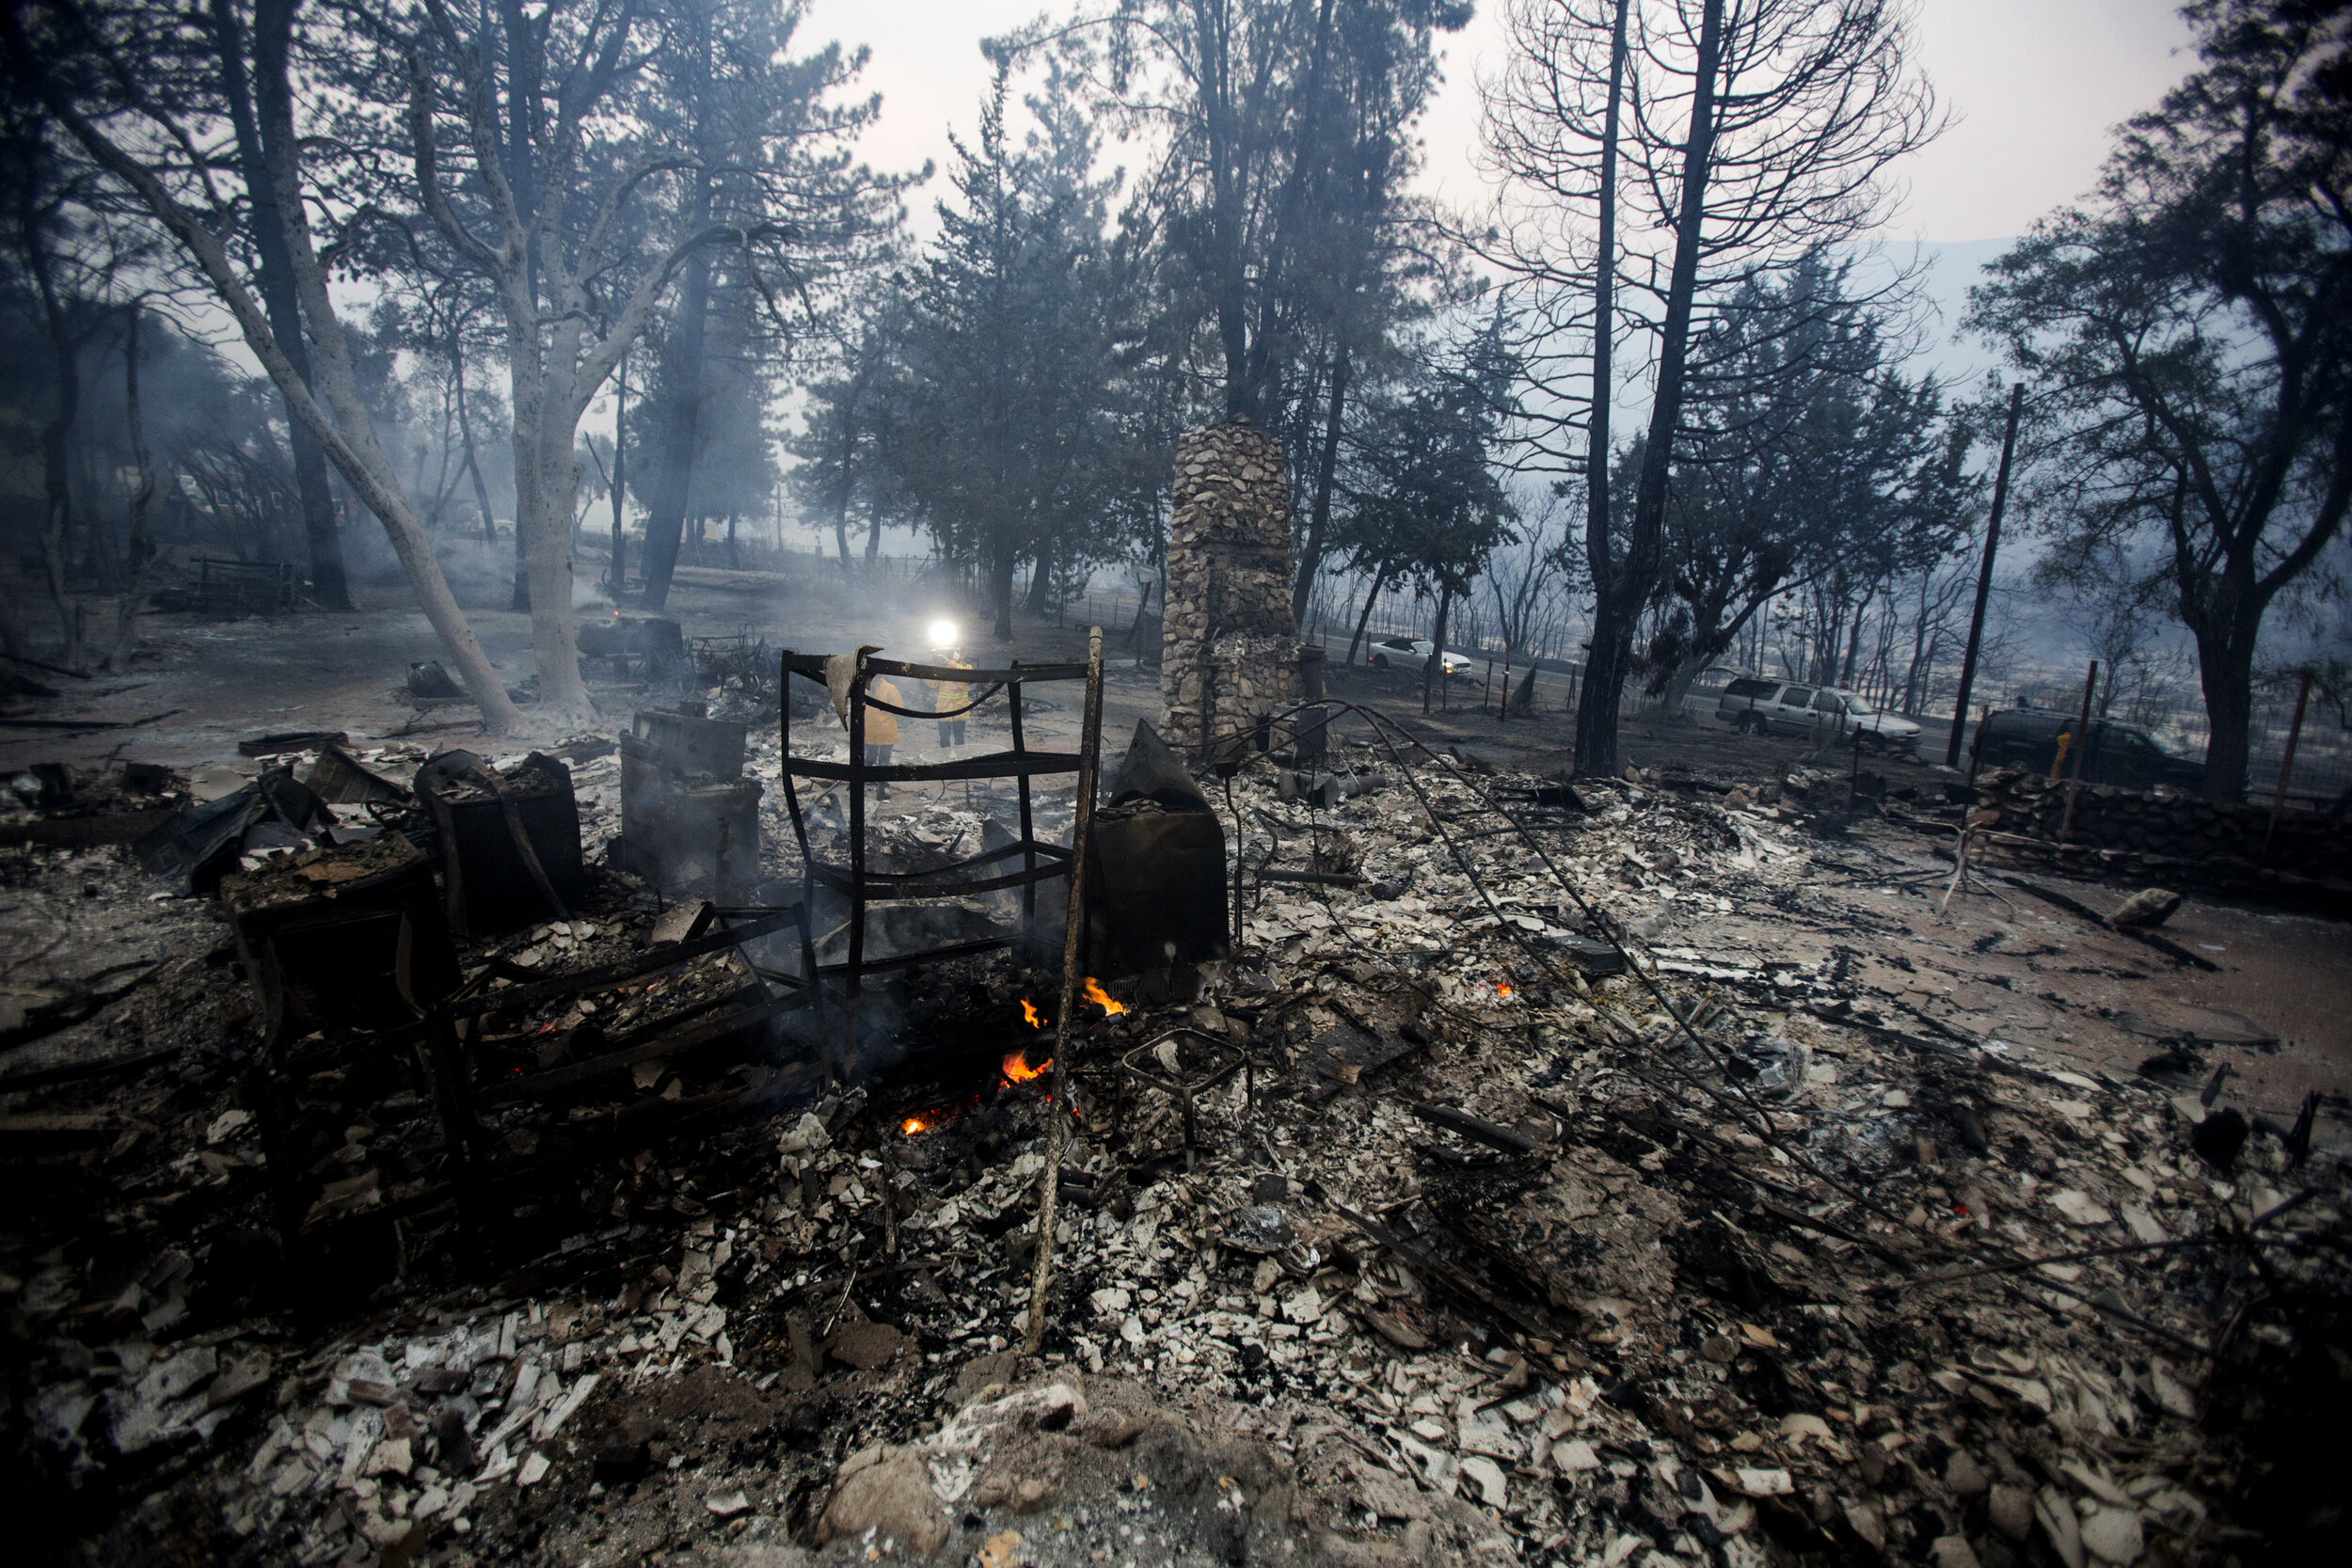  The charred remains of the burned out home are seen in the Lake Hughes fire in Angeles National Forest on Thursday, Aug. 13, 2020, north of Santa Clarita, Calif. The 2020 California wildfire season was characterized by a record-setting year of wildf